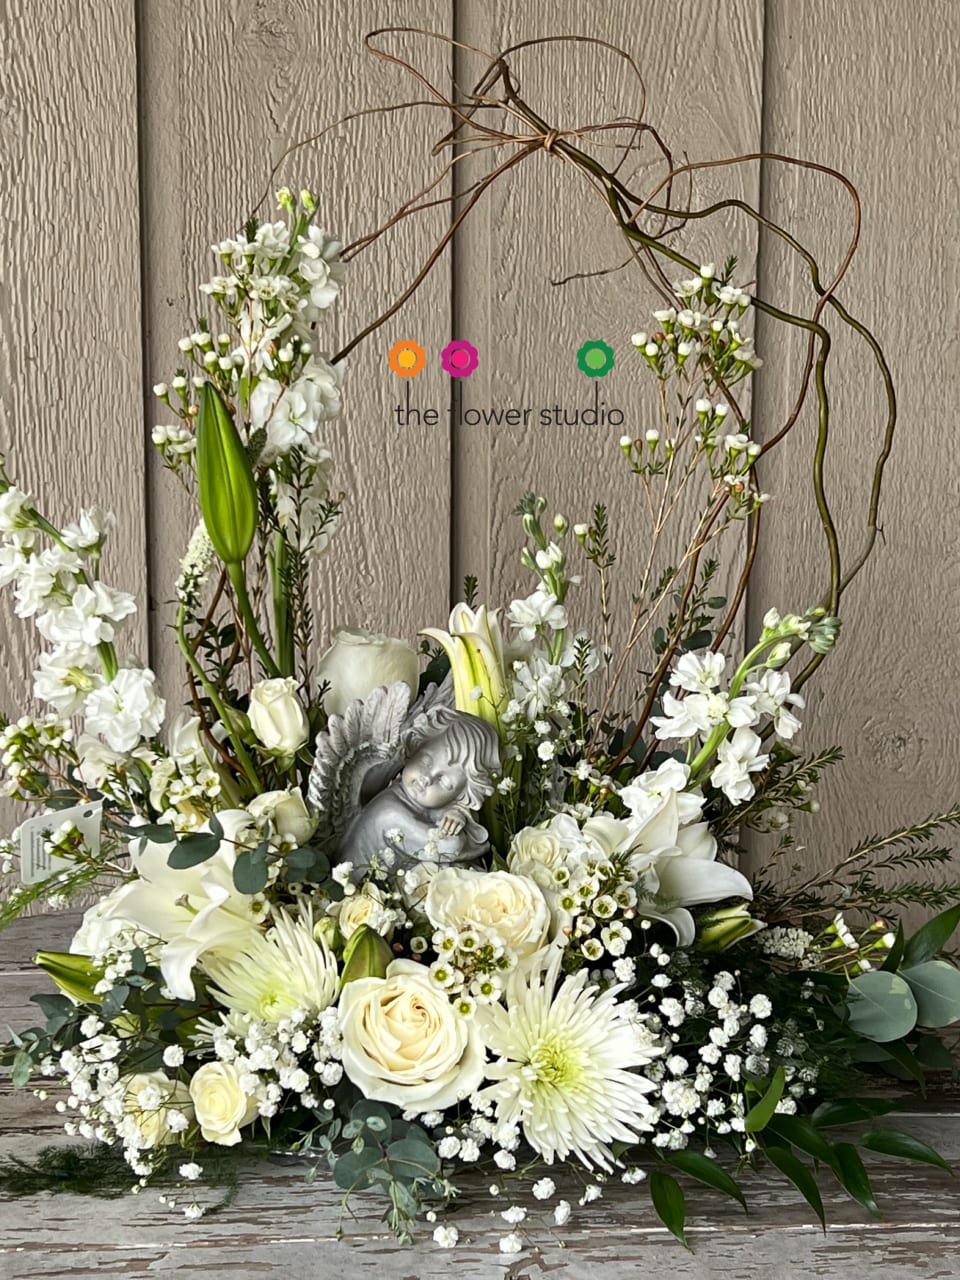 Guiding Angel Bouquet - As serene as gently falling snow, this pure white arrangement of roses, lilies and stock is a heartfelt symbol of peace and beauty. Its graceful angel keepsake sculpture will remain a guiding light to your loved ones for years to come. White roses, white cushions, gyp, white stock, white lilies are arranged in a Lomey dish making the focal area, the Guardian Angel. Contents/ Angel may vary - if any specific flowers/colors, please let us know. We will try our best to accommodate. 